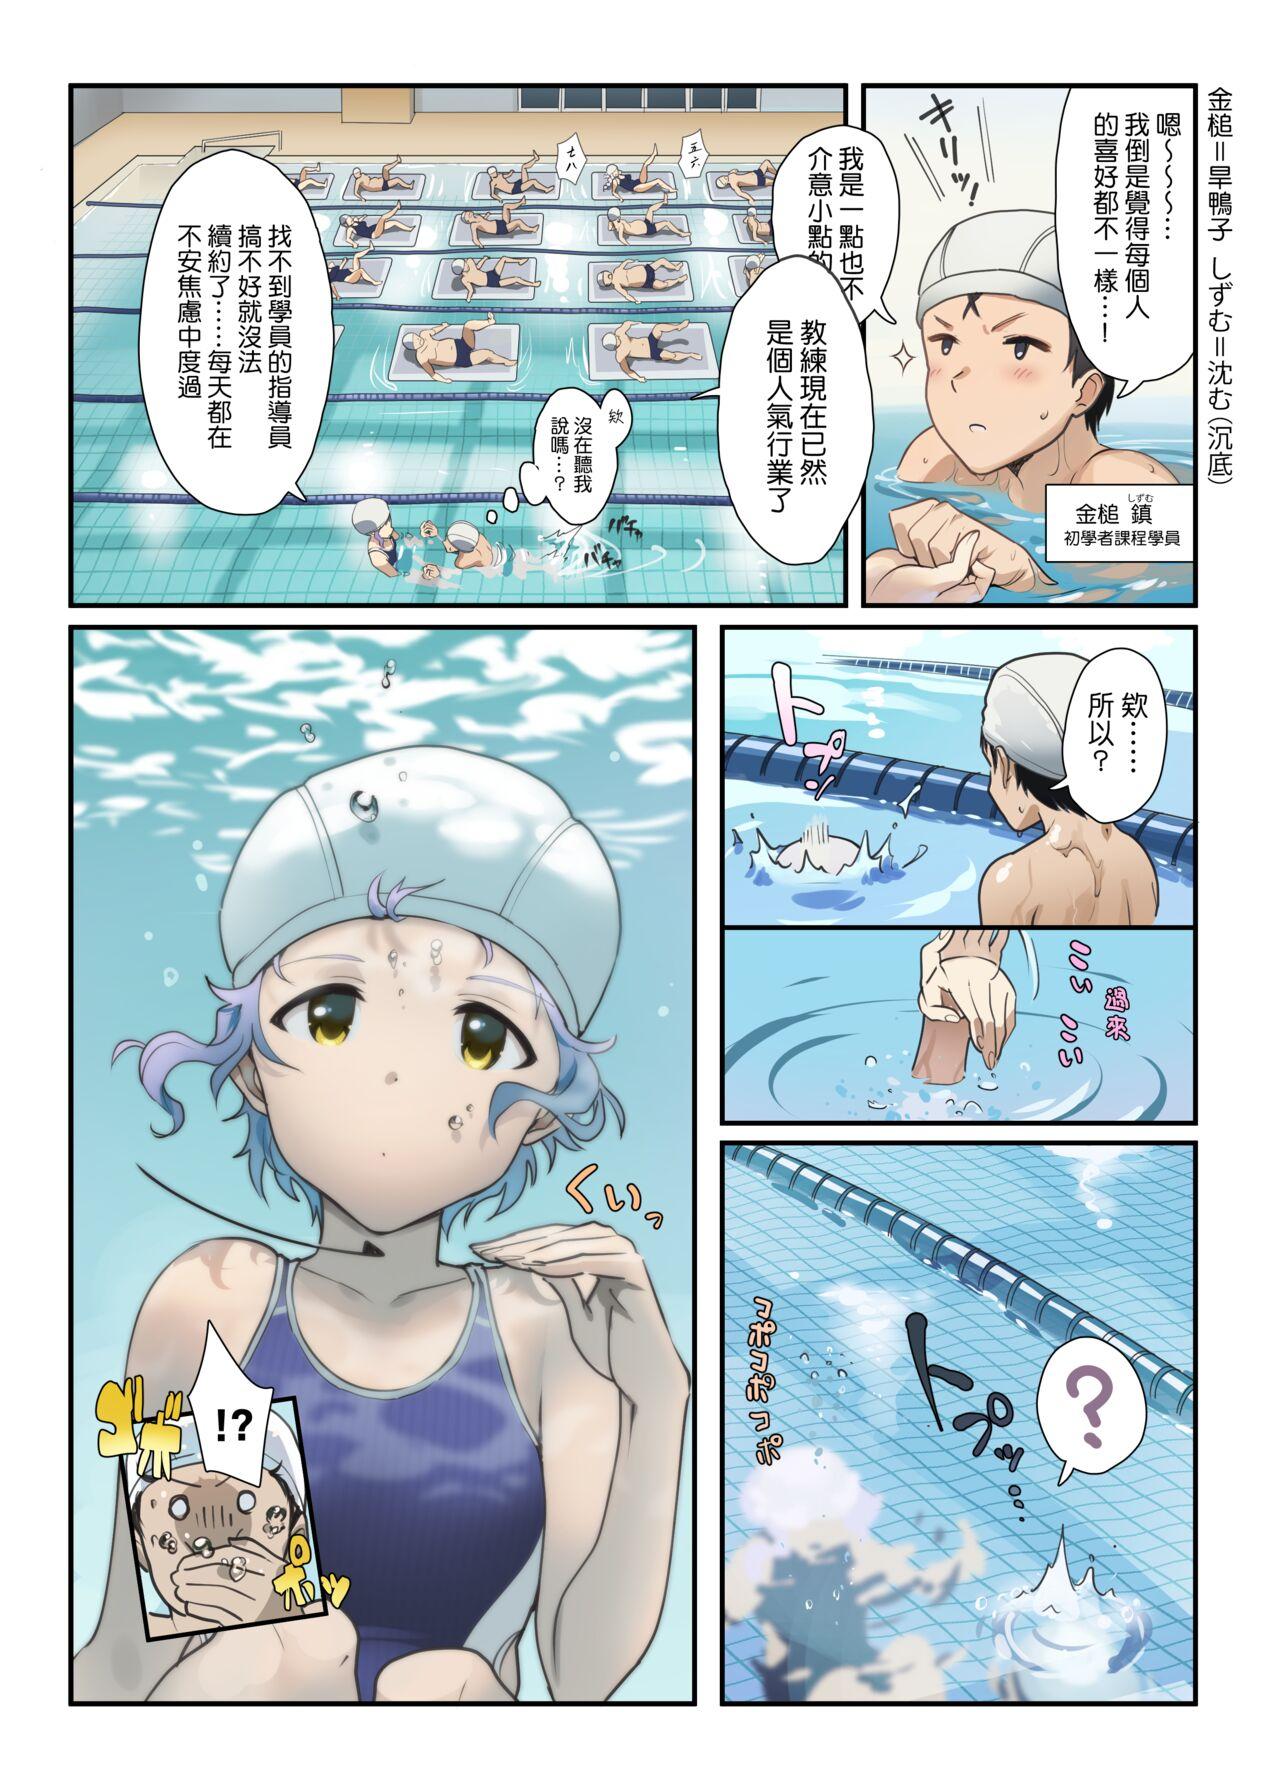 Eating Oshigoto Theater 11 - The idolmaster Cougars - Page 4